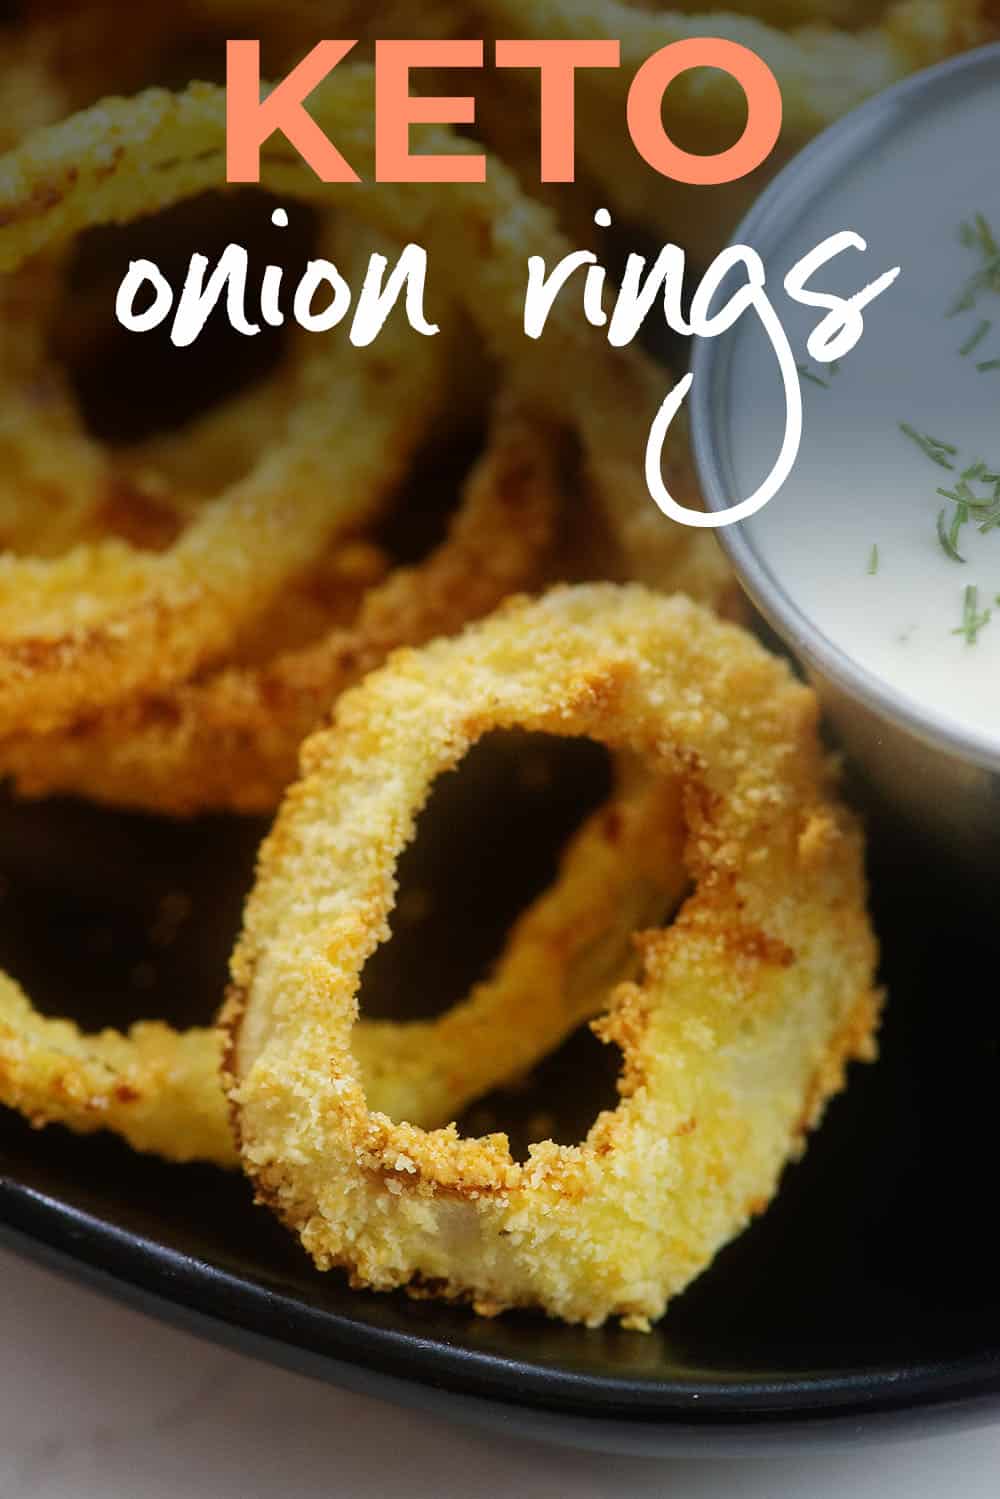 keto onion rings on black plate with text for PInterest.